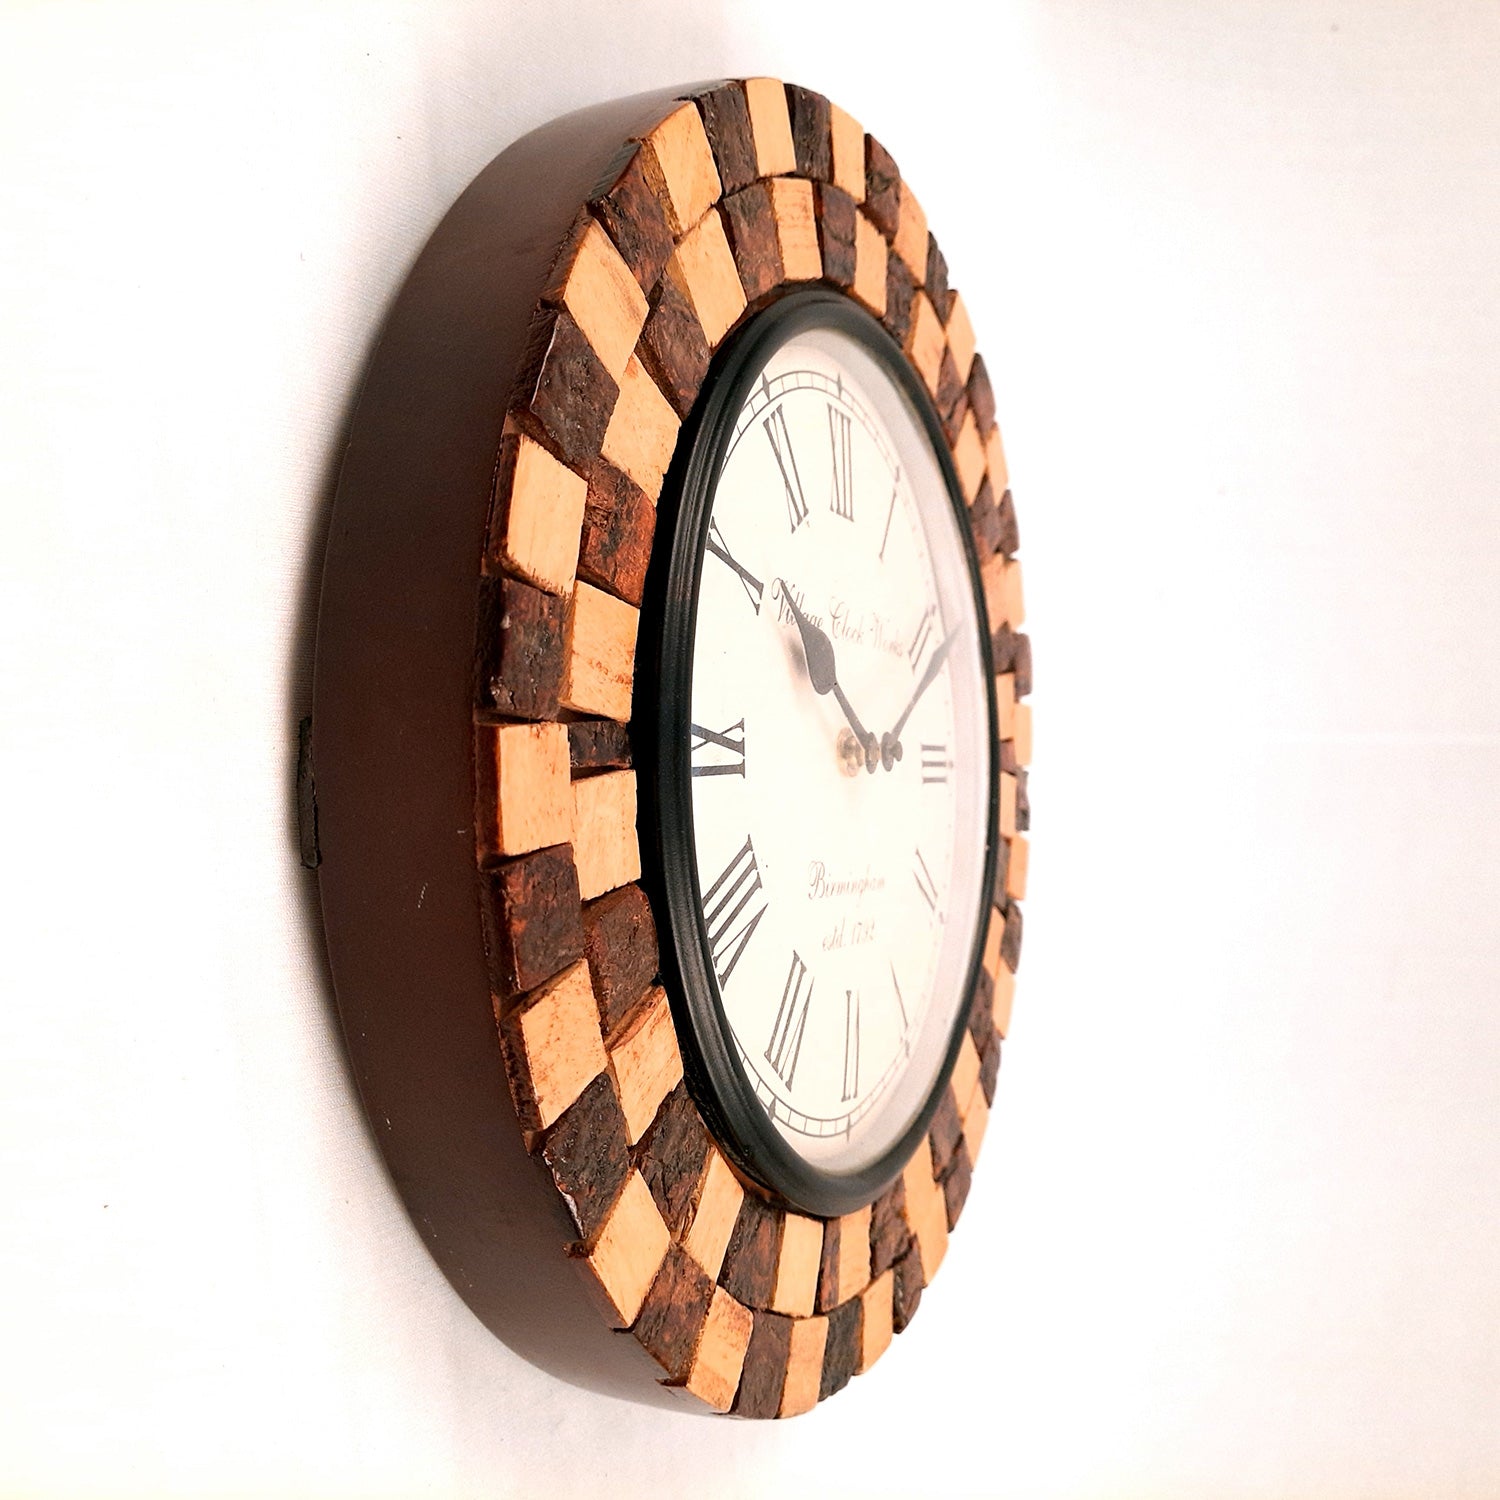 Wall Clock Wooden | Wall Mount Analogue Clock With Premium Wood Finish & Brass Work - For Home, Living Room, Bedroom, Hall Decor | Wedding & Housewarming Gift - 12 Inch